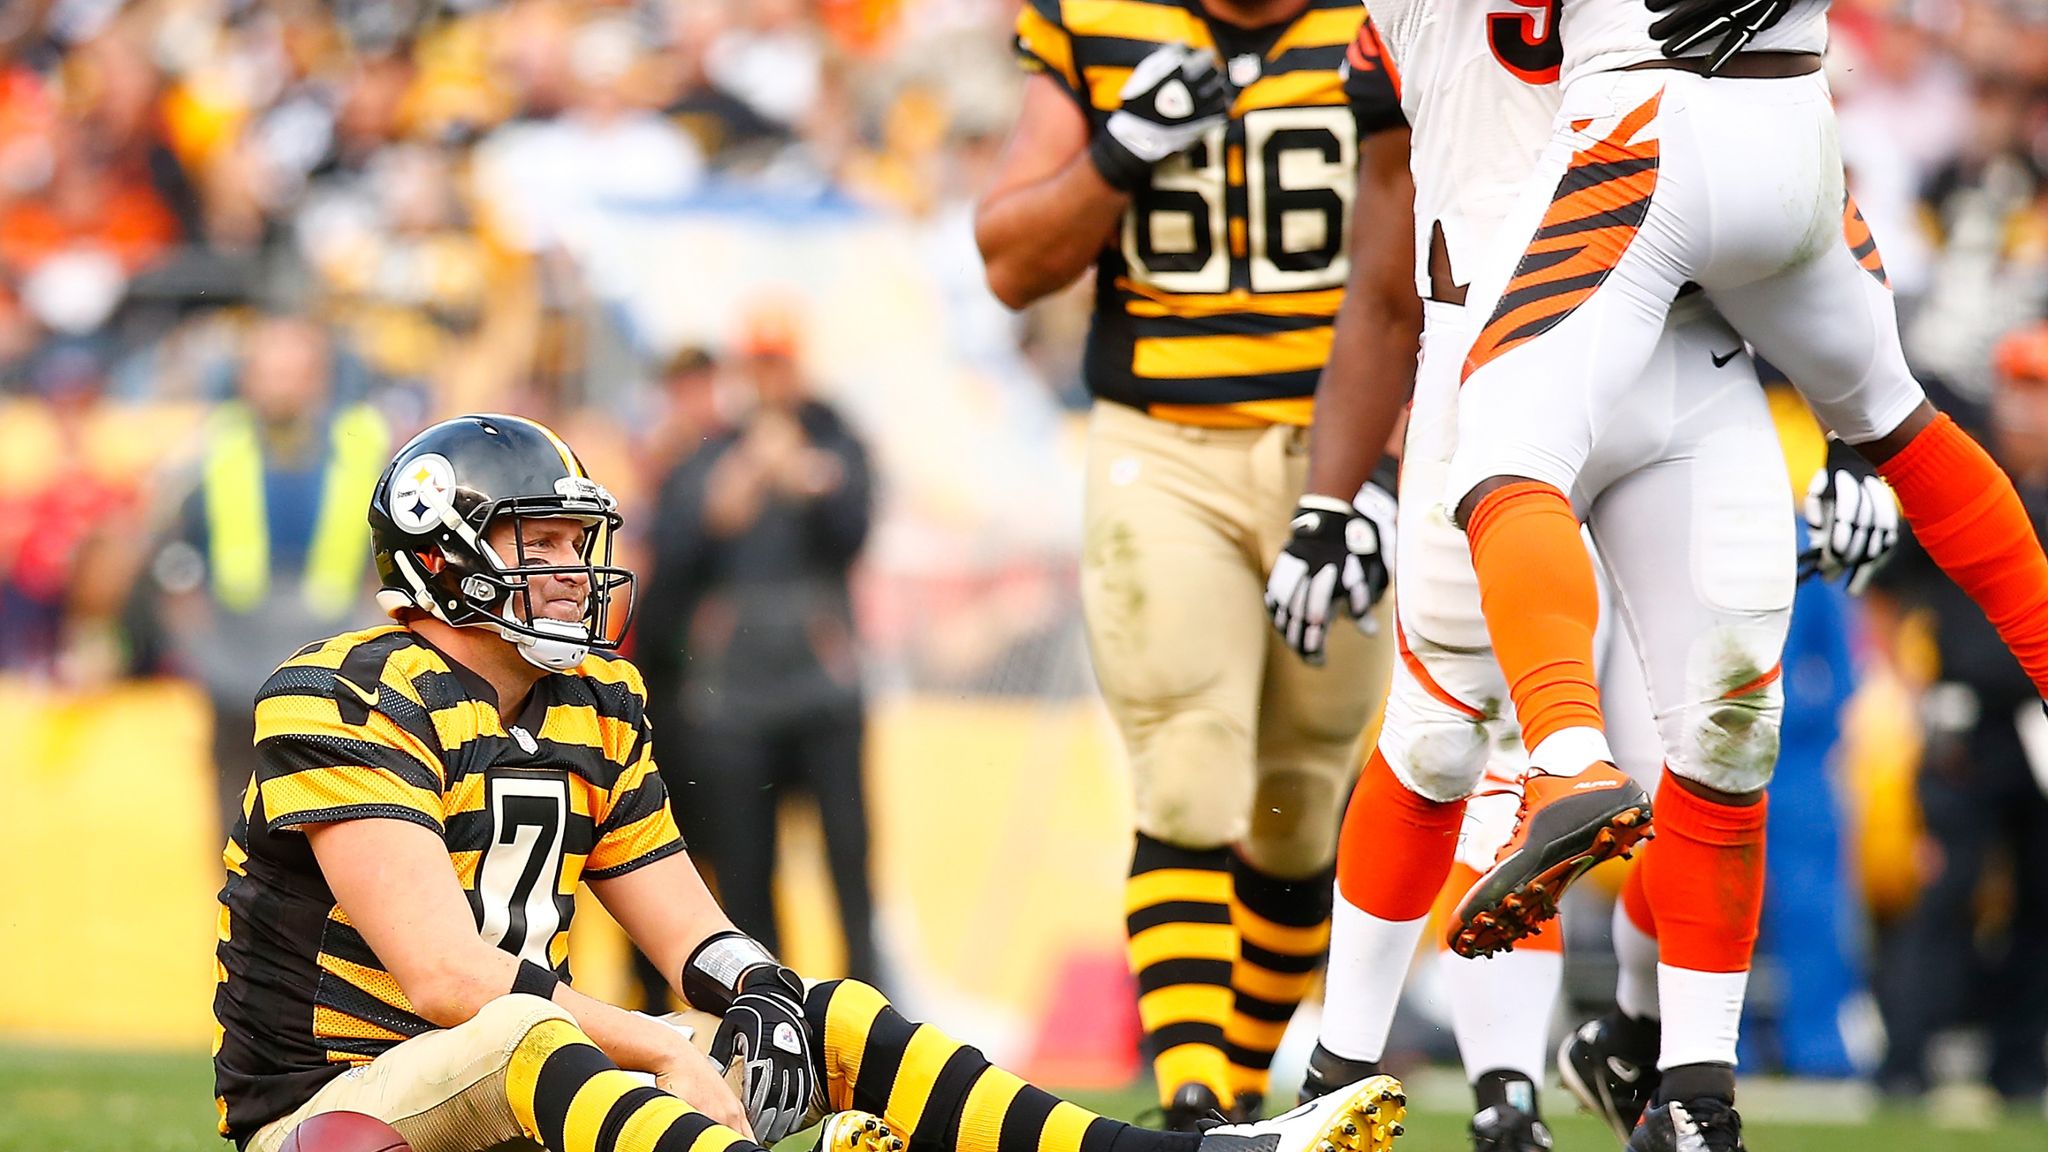 Cincinnati Bengals rally to beat Pittsburgh Steelers and stay undefeated, NFL News